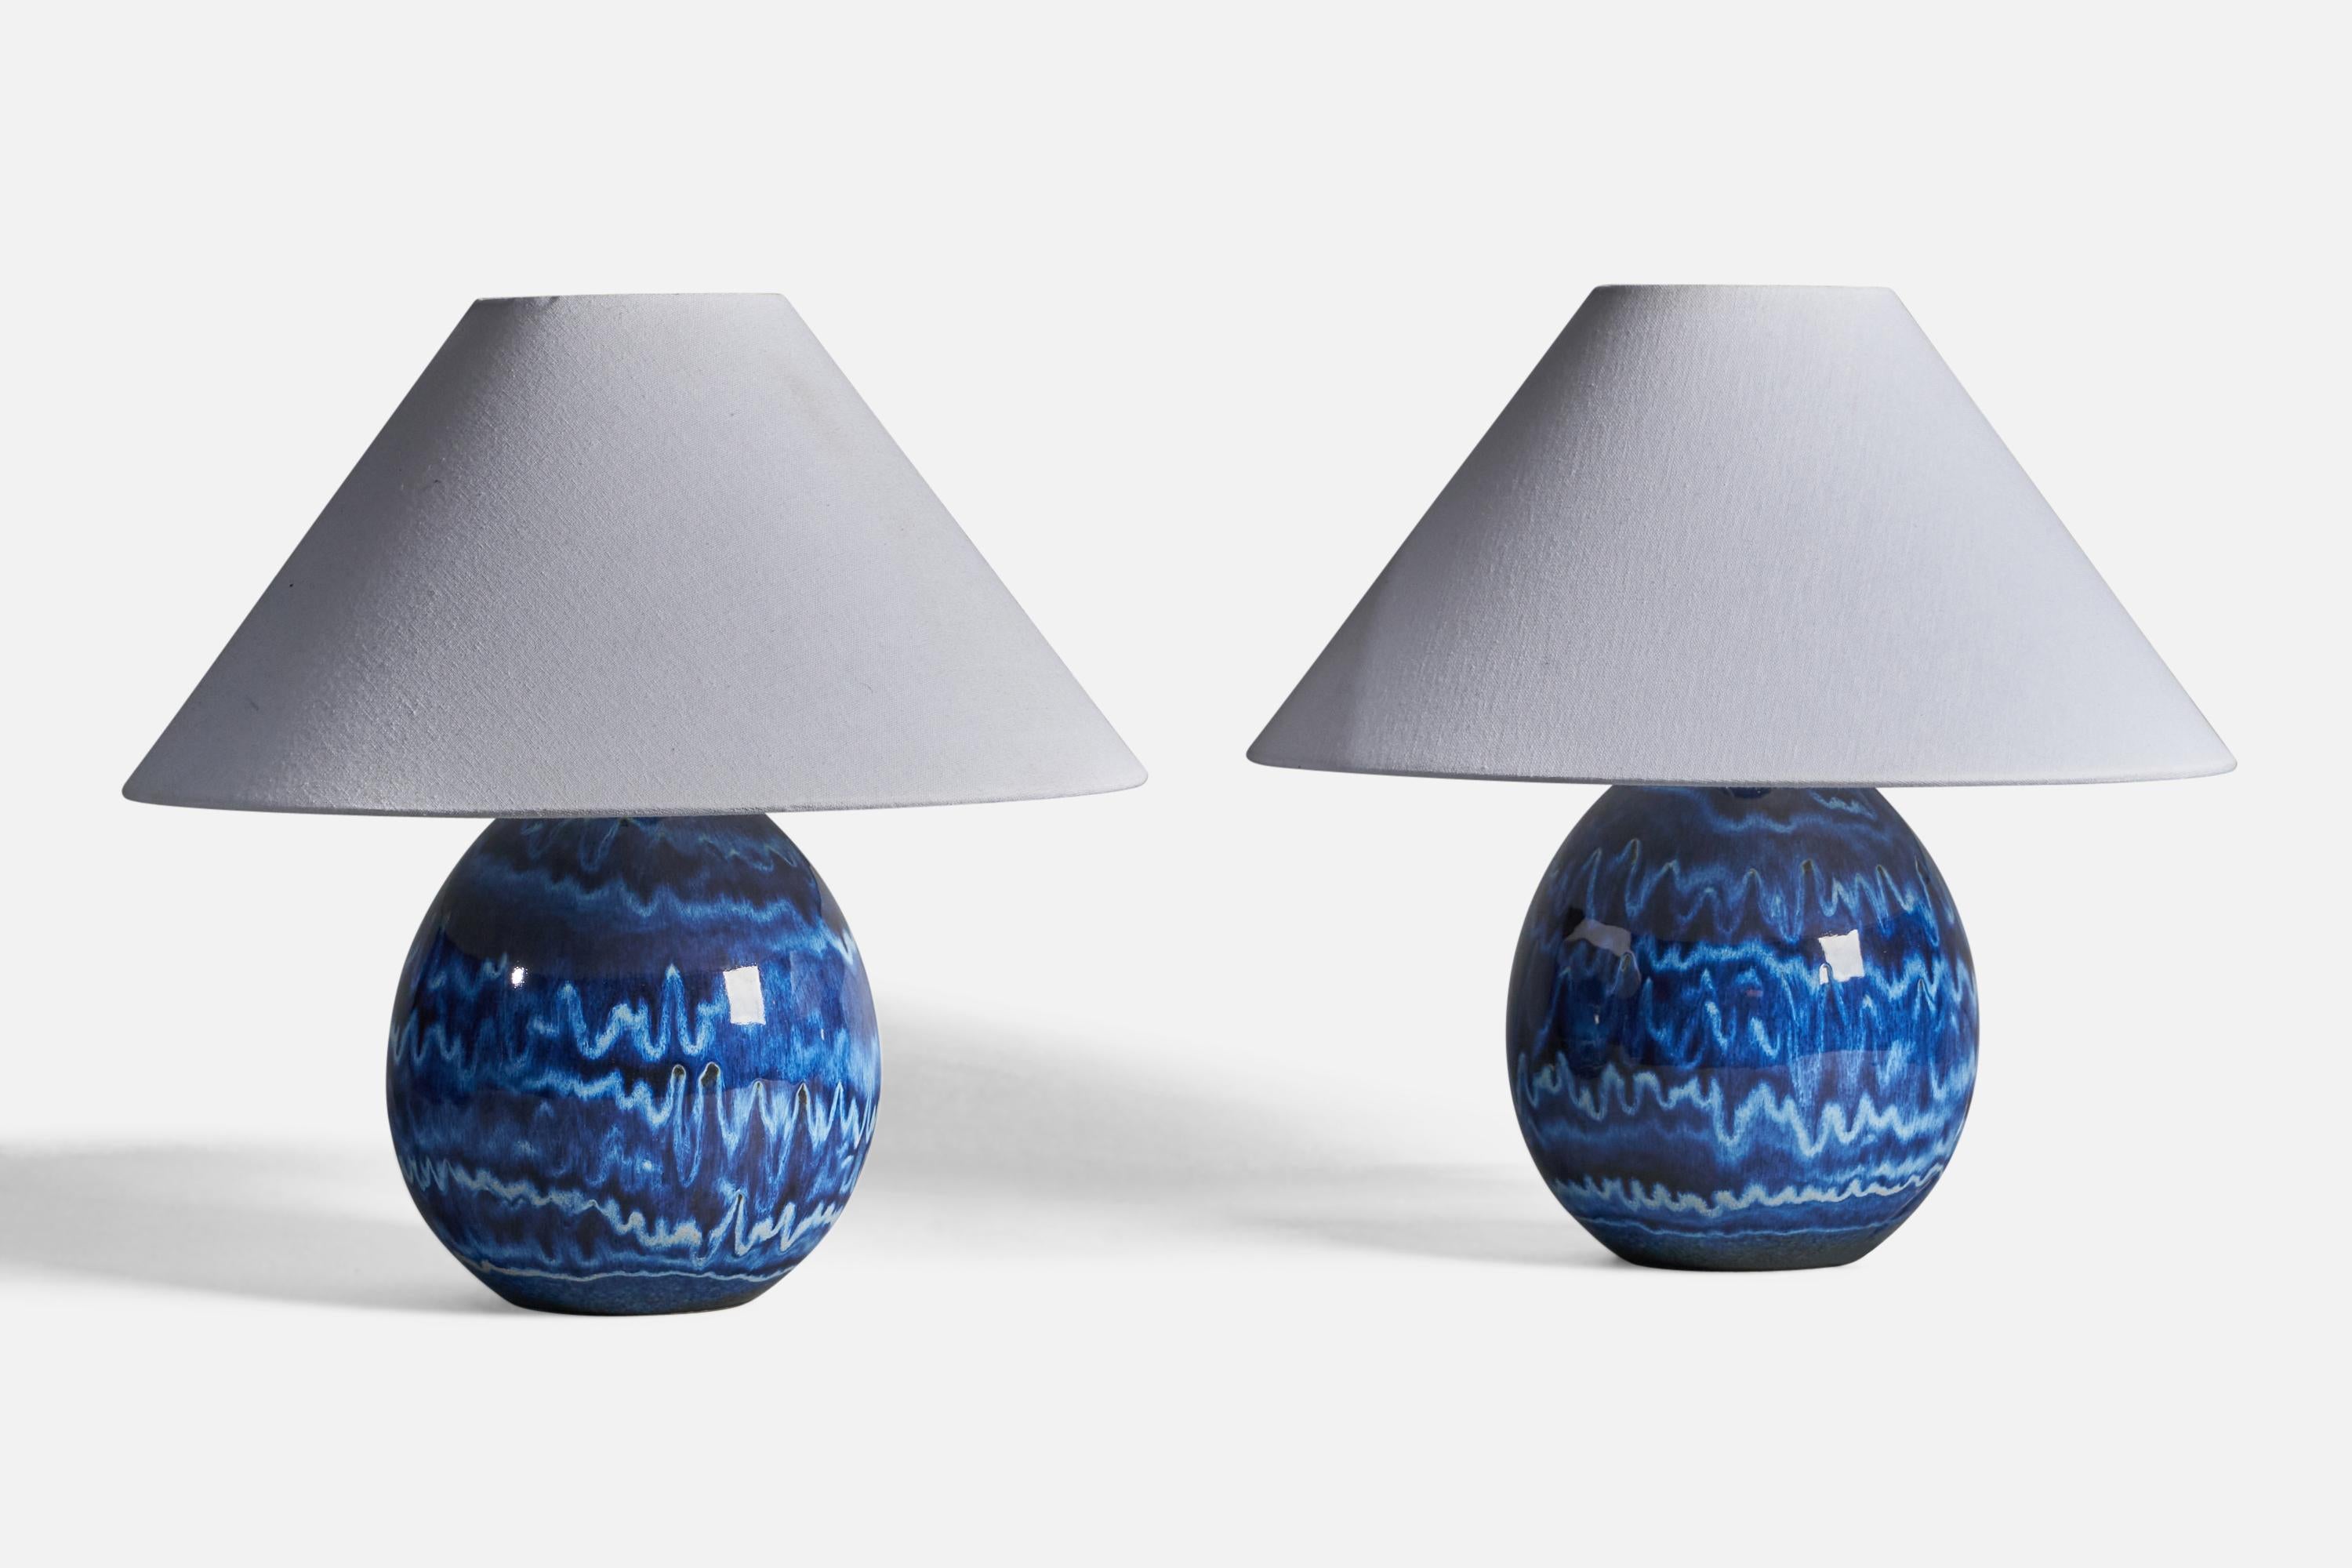 A pair of blue-glazed stoneware table lamps, designed by Carl-Harry Stålhane and produced by Designhuset, Sweden, c. 1970s.

Dimensions of Lamp (inches): 10.75